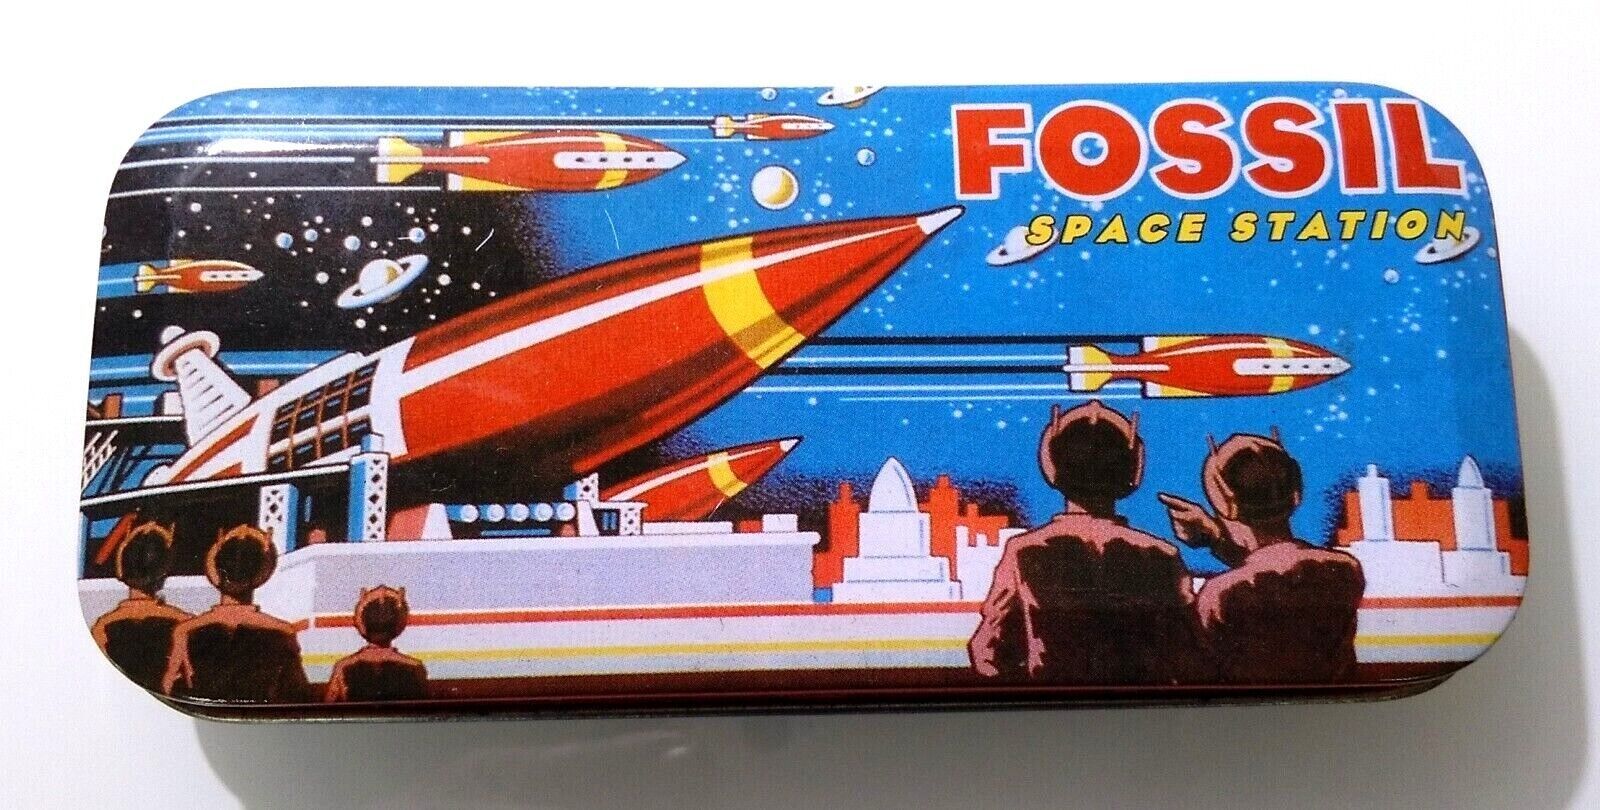 FOSSIL SPACE STATION ✱ Beautiful Rare Vintage Watch Tin Can 1995 Original EMPTY - $29.99